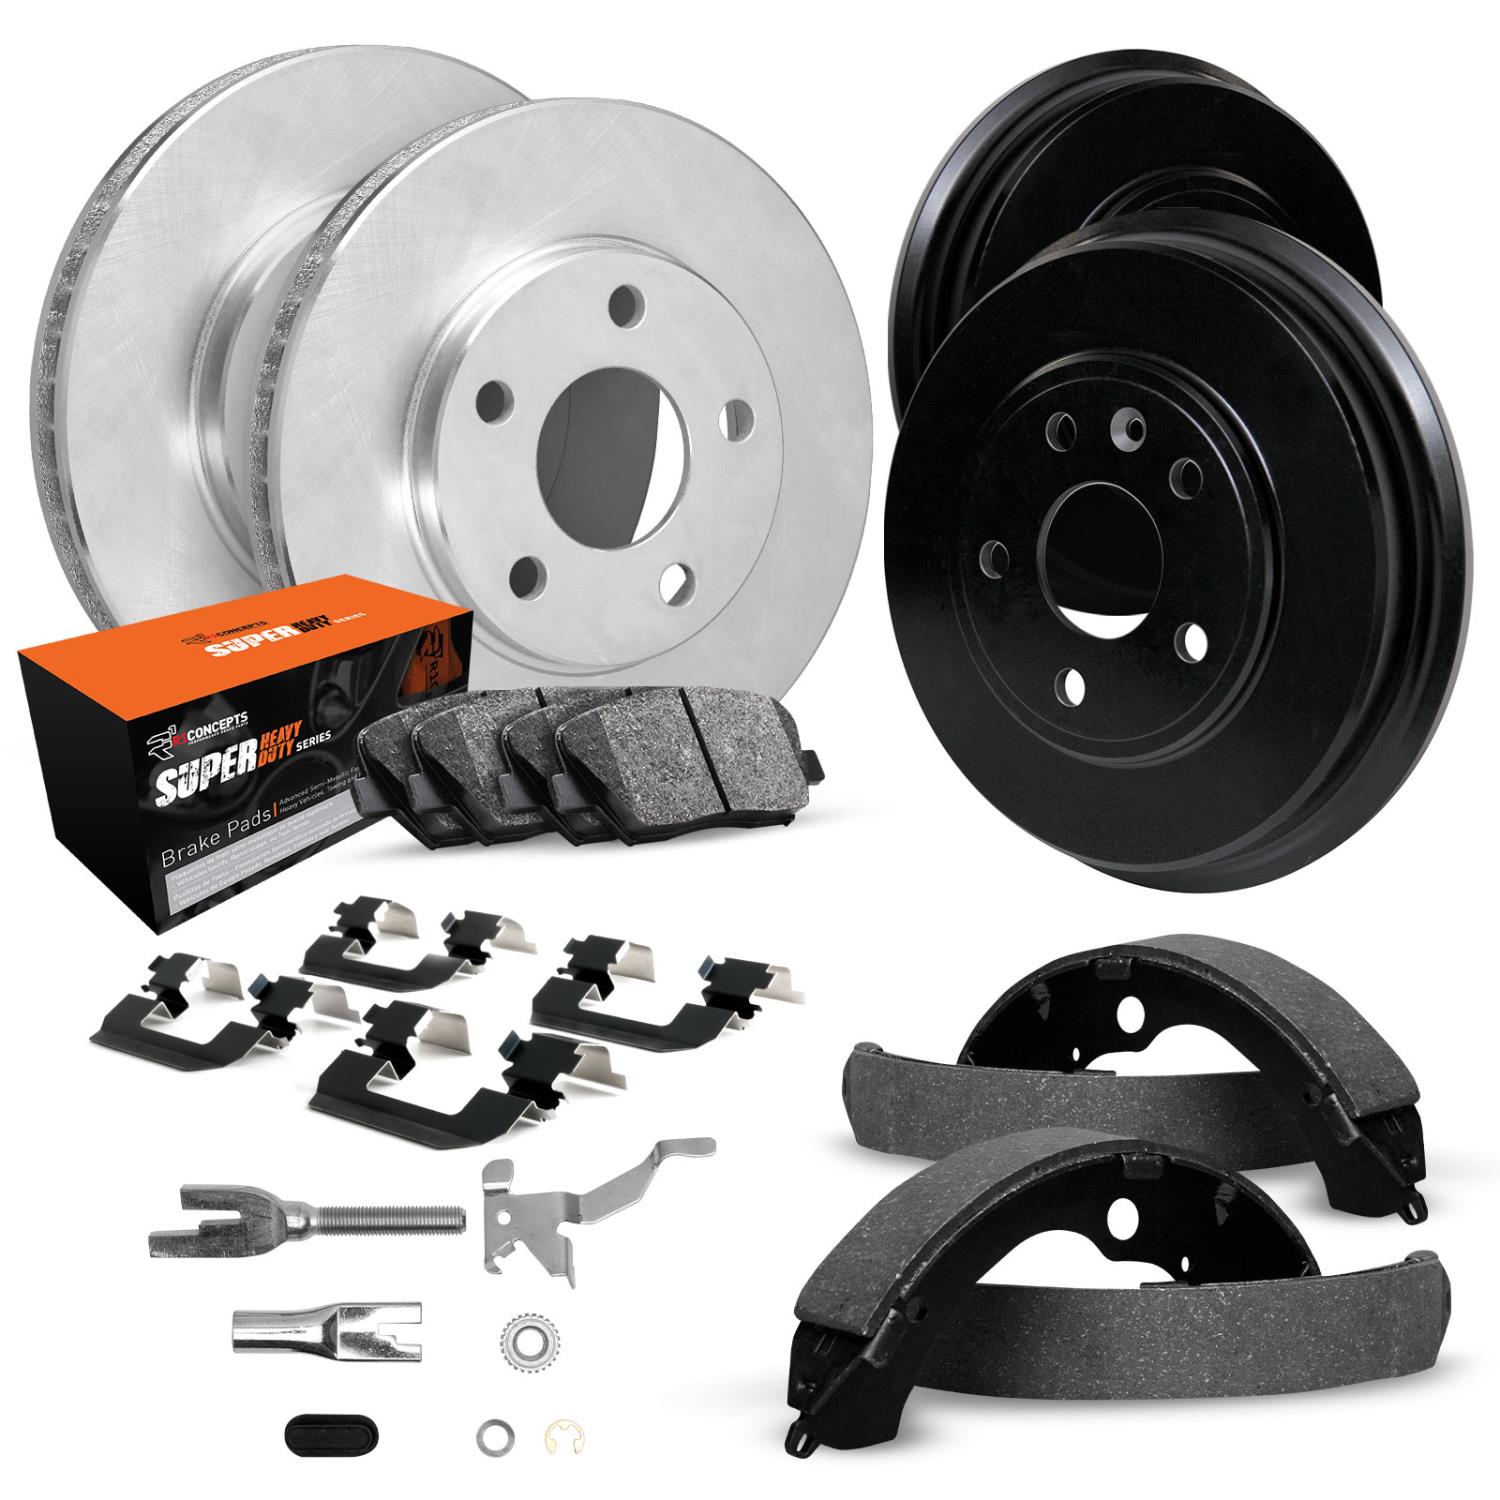 E-Line Blank Brake Rotor & Drum Set w/Super-Duty Pads, Shoes, Hardware, & Adjusters, 1986-1993 Ford/Lincoln/Mercury/Mazda